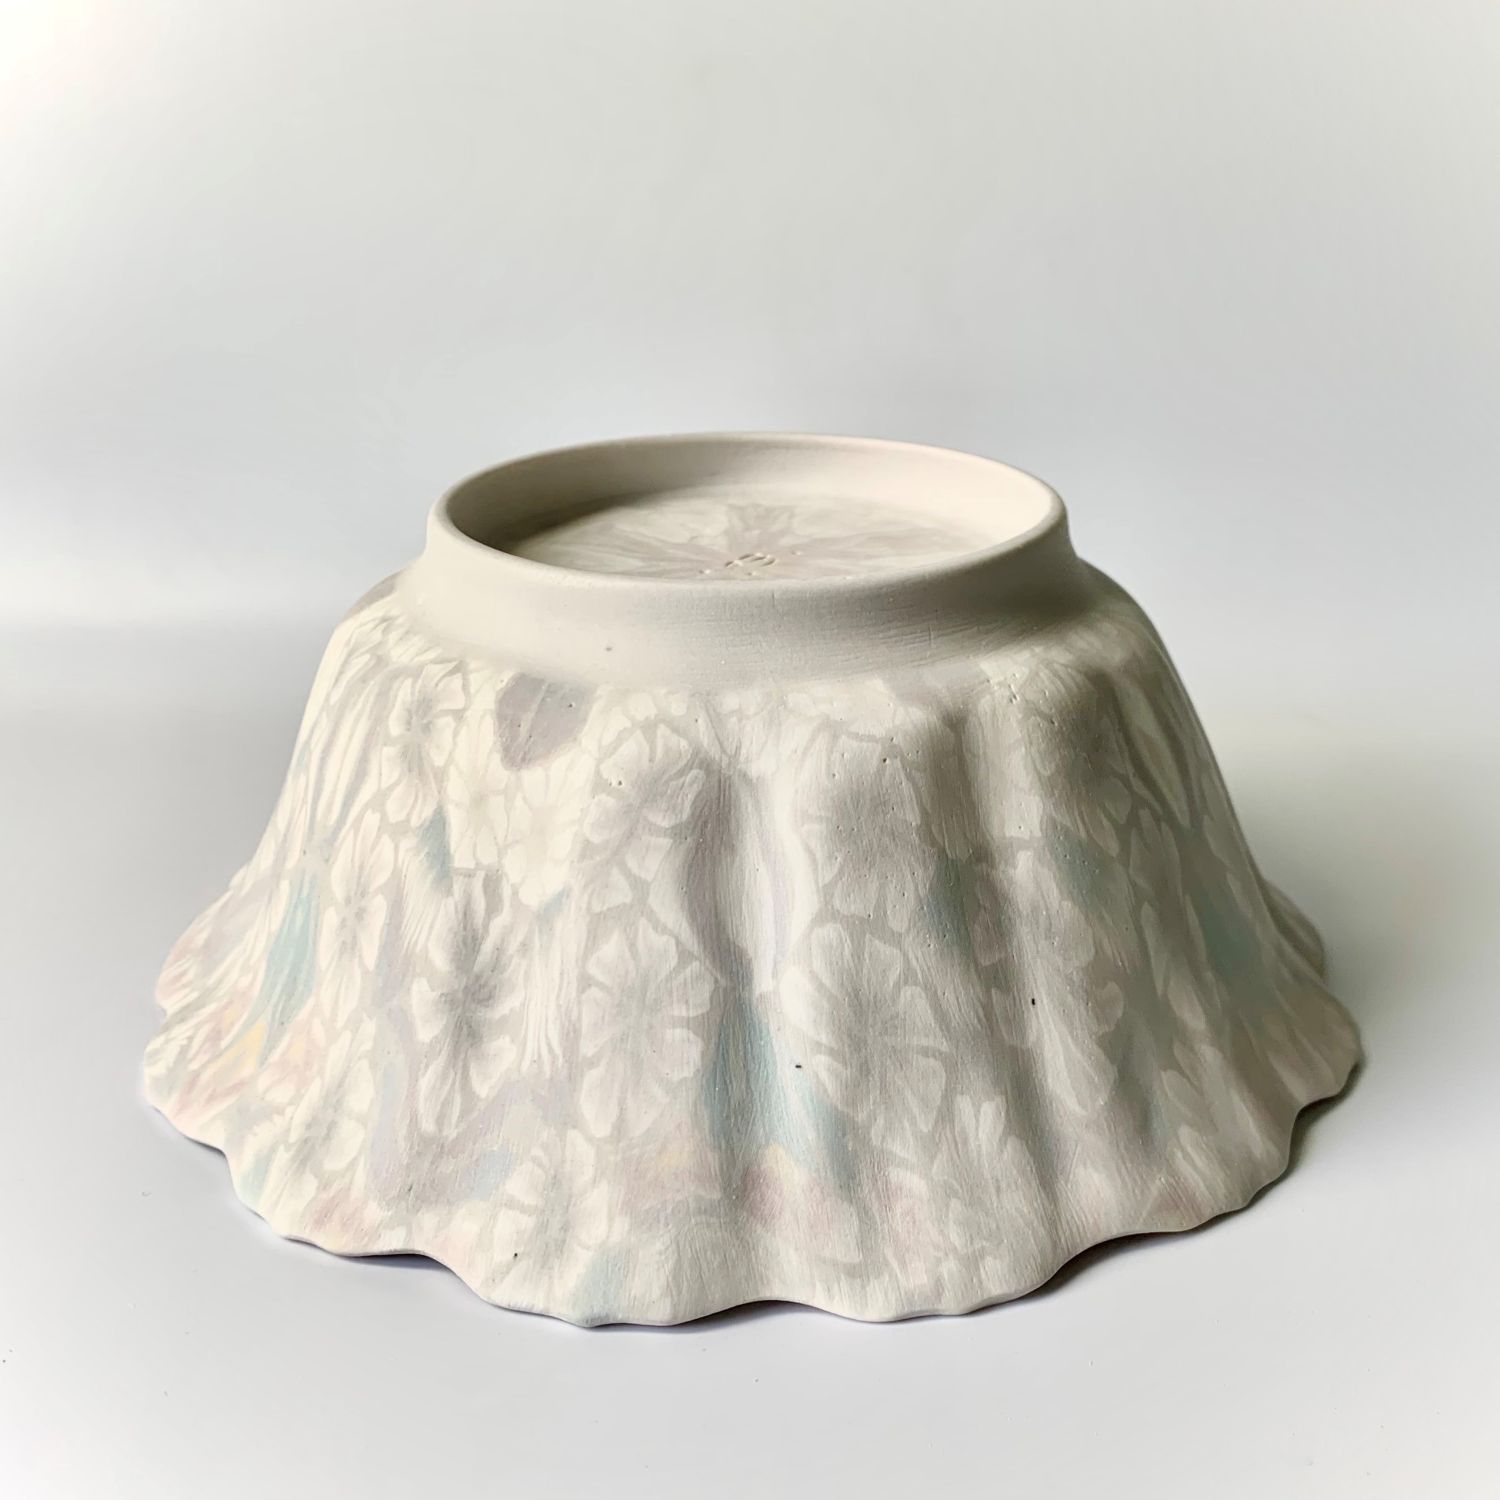 Eiko Maeda: Flat Bottom Bowl in Blue, Pink and Grey Product Image 2 of 3